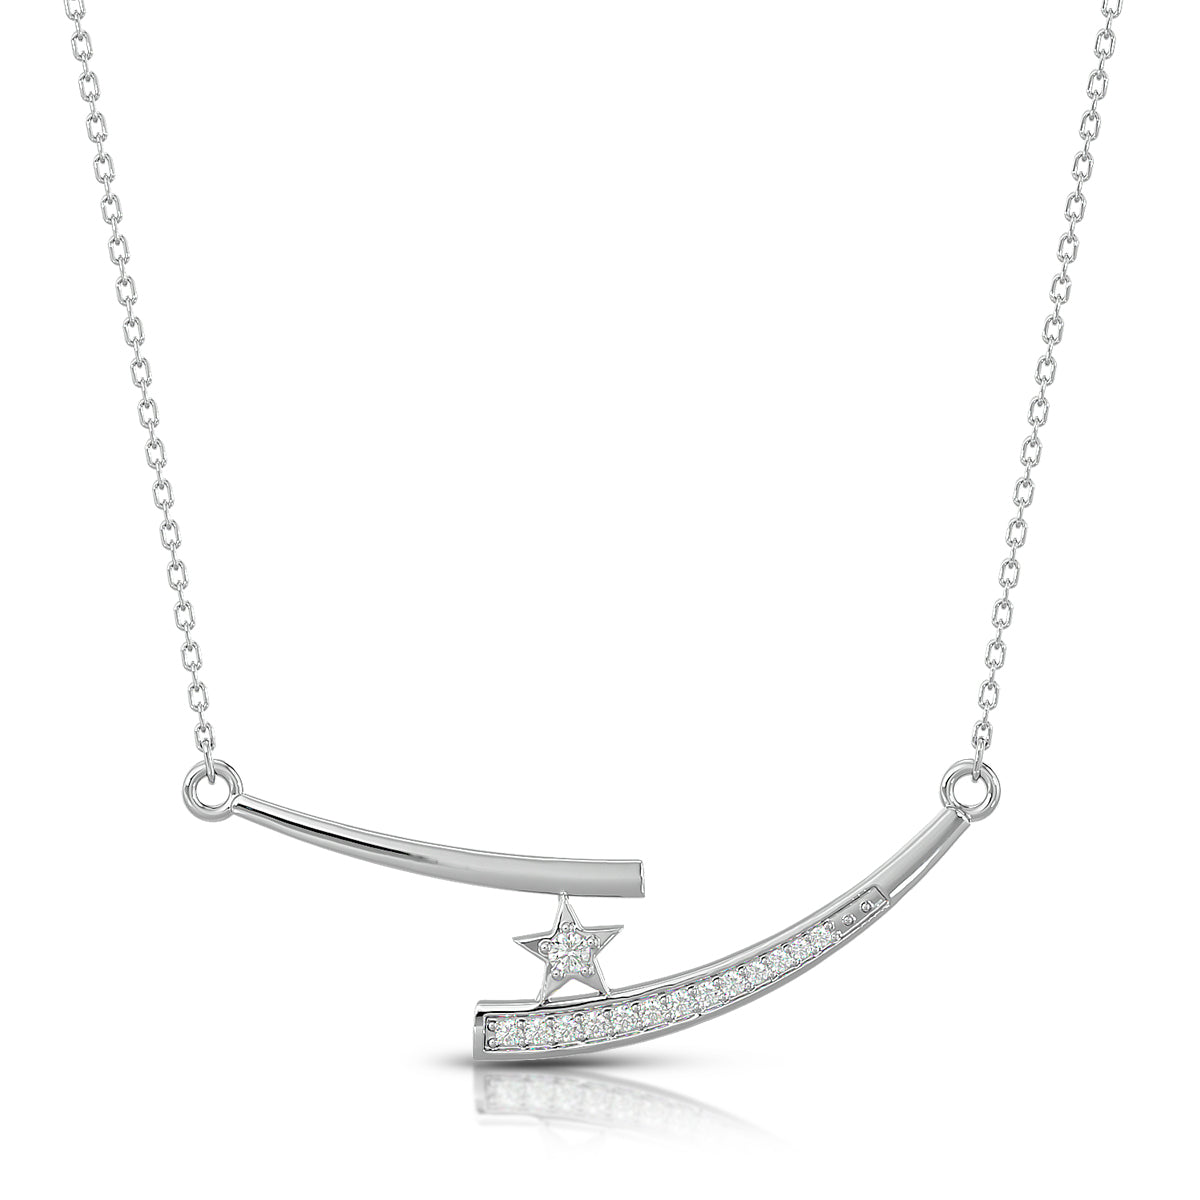 Adventure Necklace 18K White Gold With Diamonds